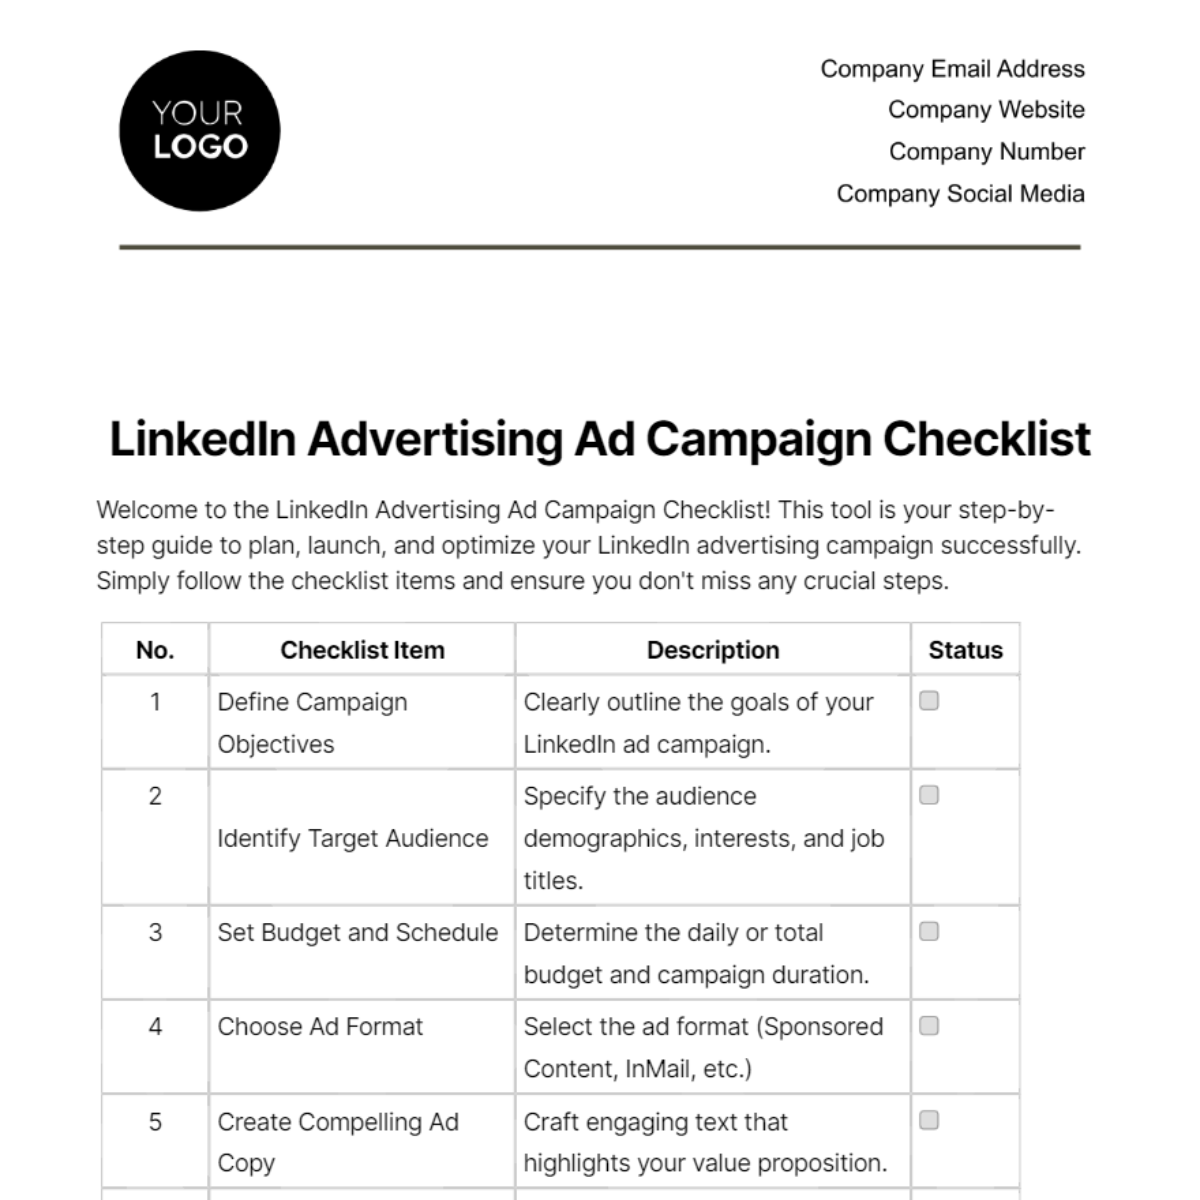 Free LinkedIn Advertising Ad Campaign Checklist Template